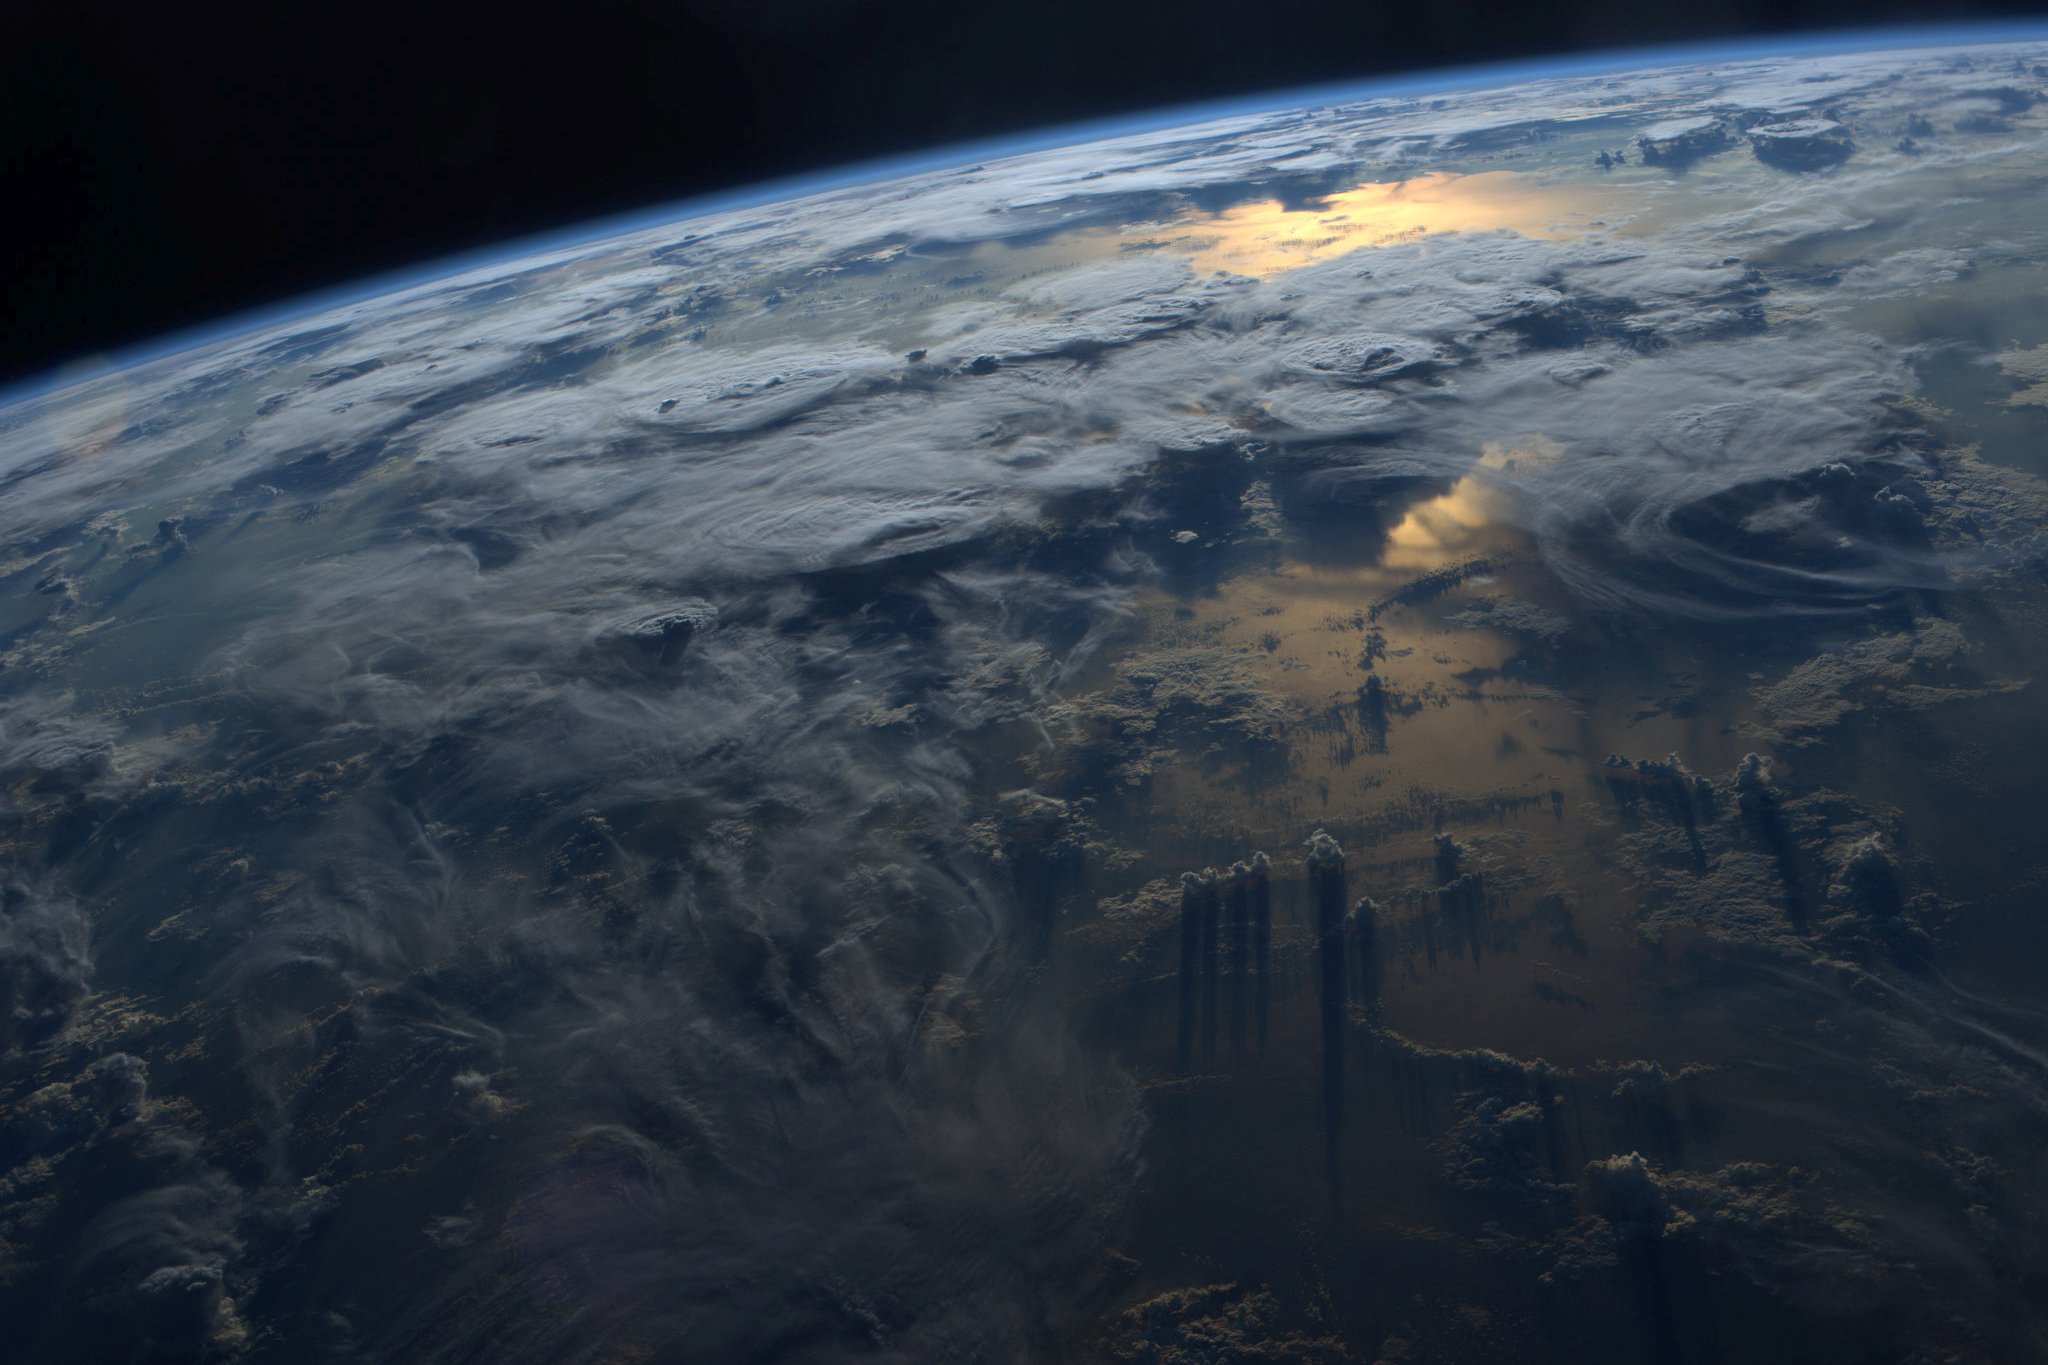 Sunset over Earth.